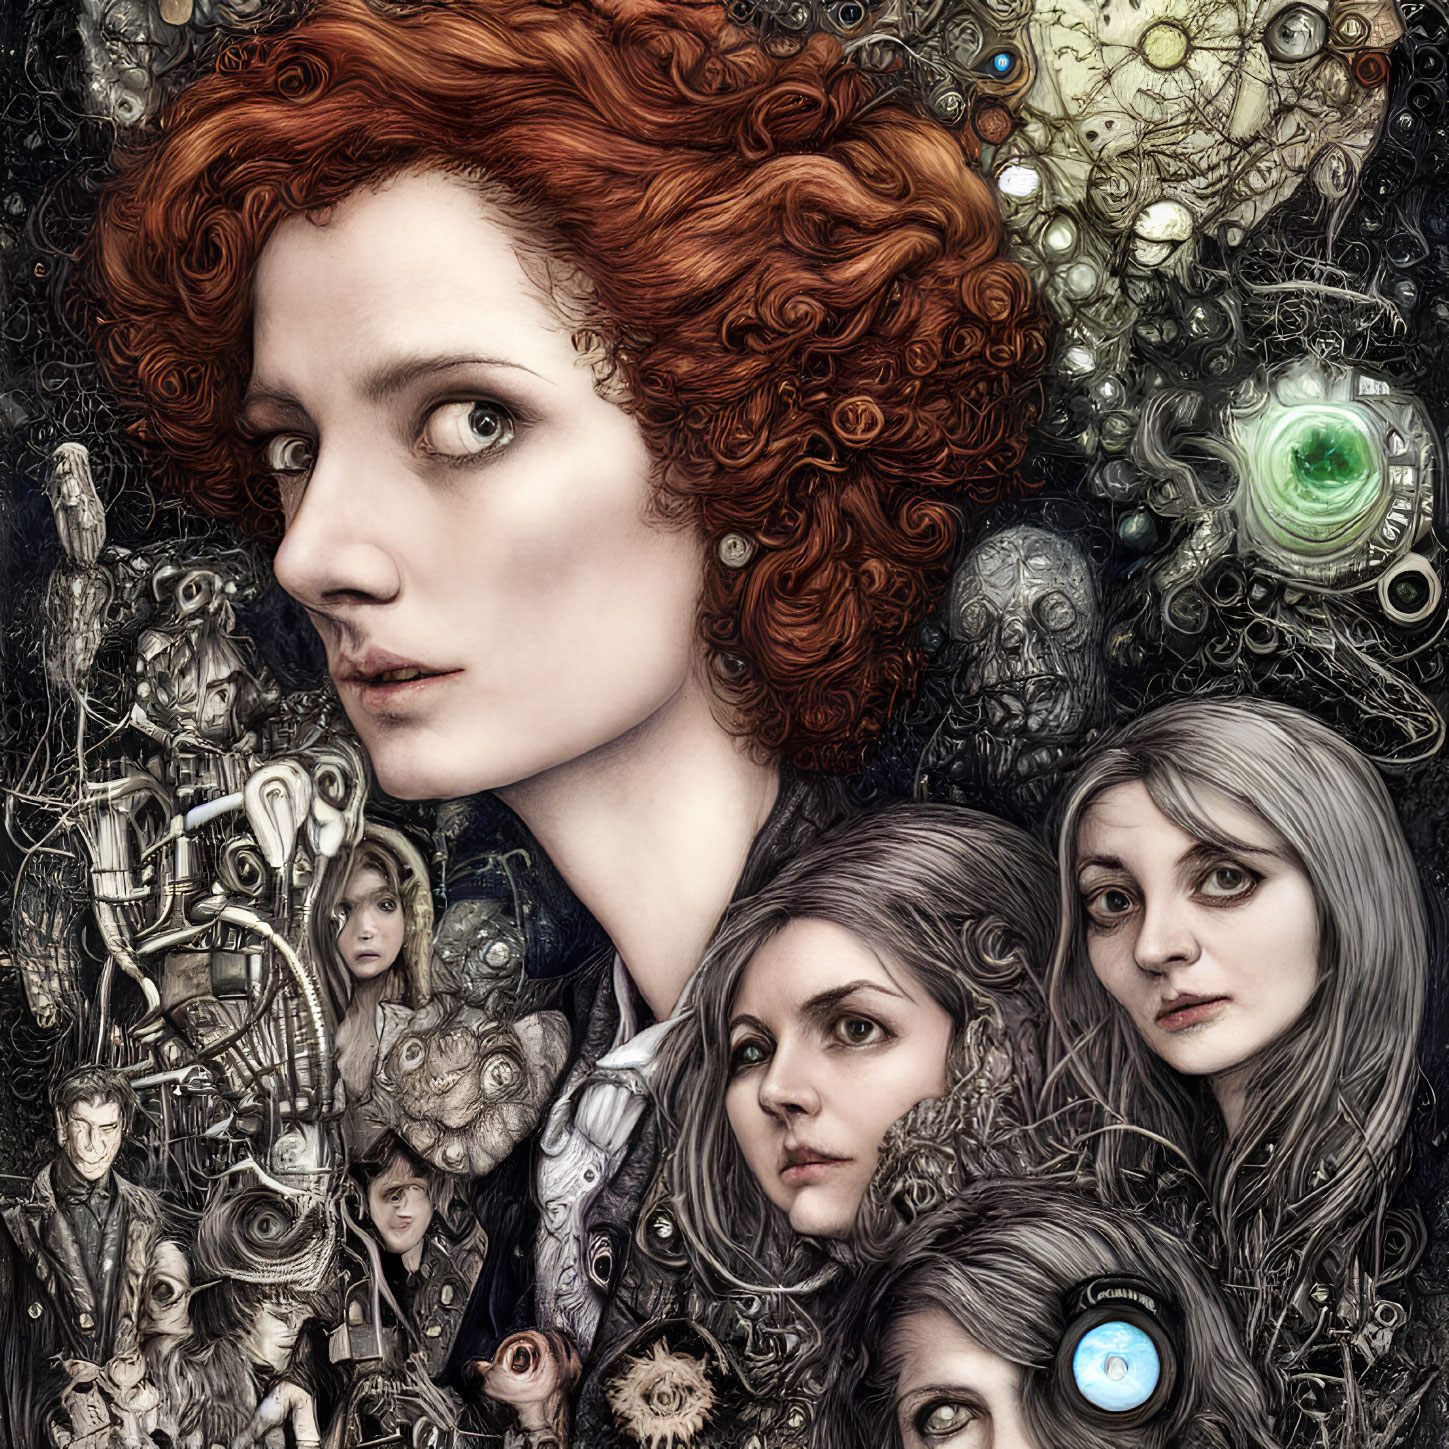 Detailed Illustration: Red-Haired Woman with Steampunk and Organic Elements